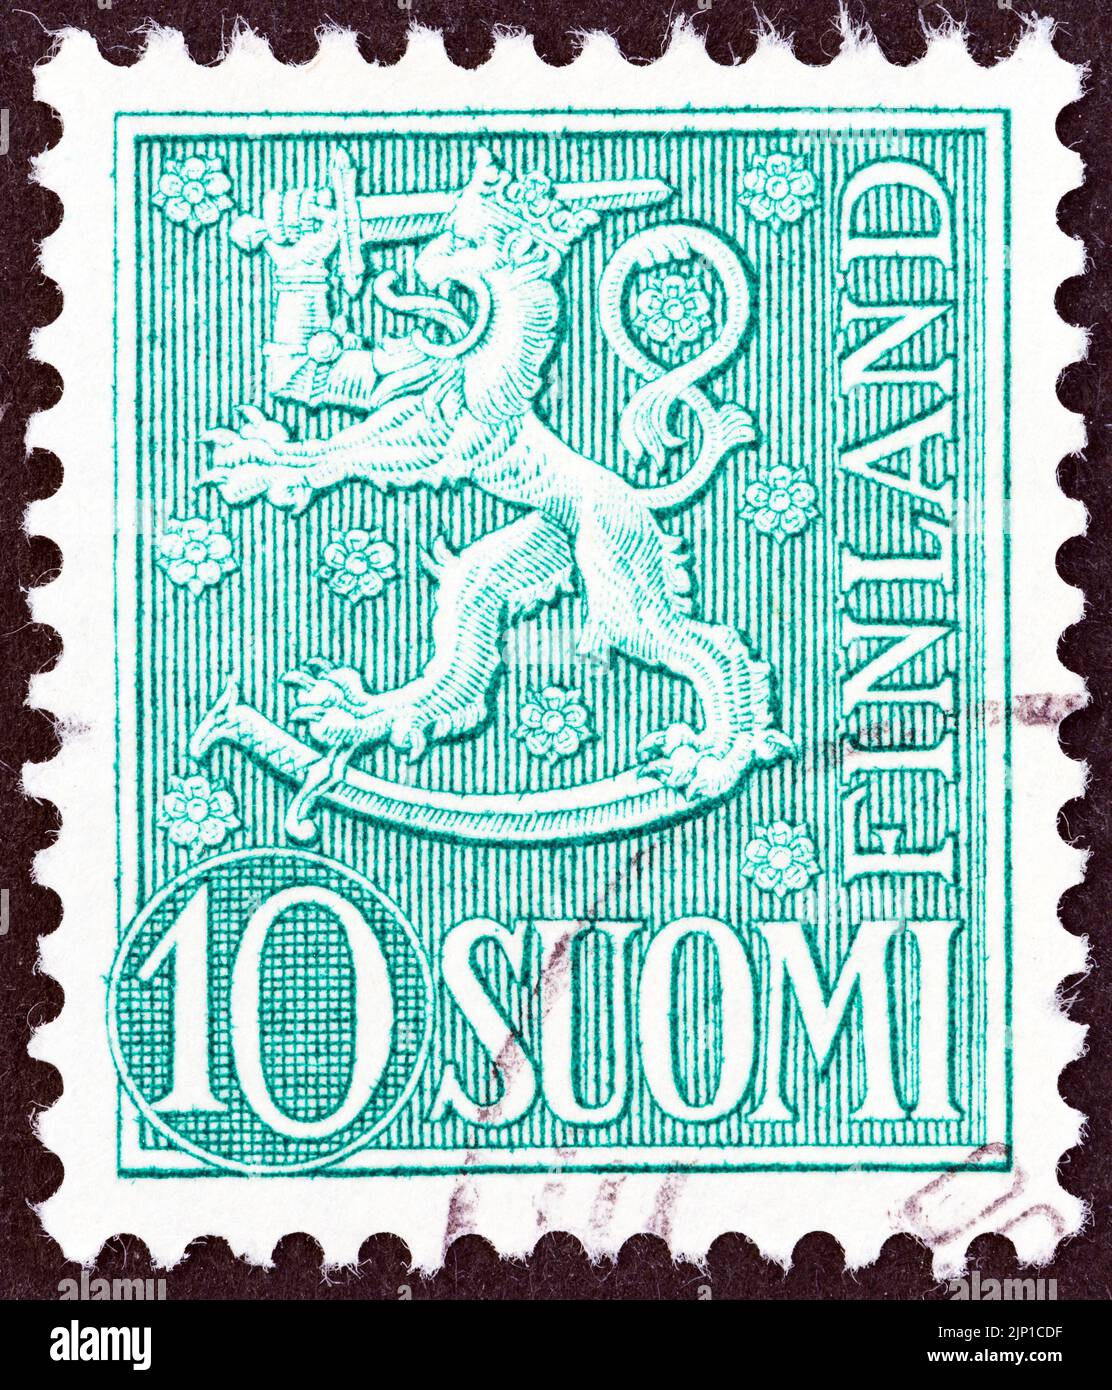 FINLAND - CIRCA 1954: A stamp printed in Finland shows National arms emblem, circa 1954. Stock Photo